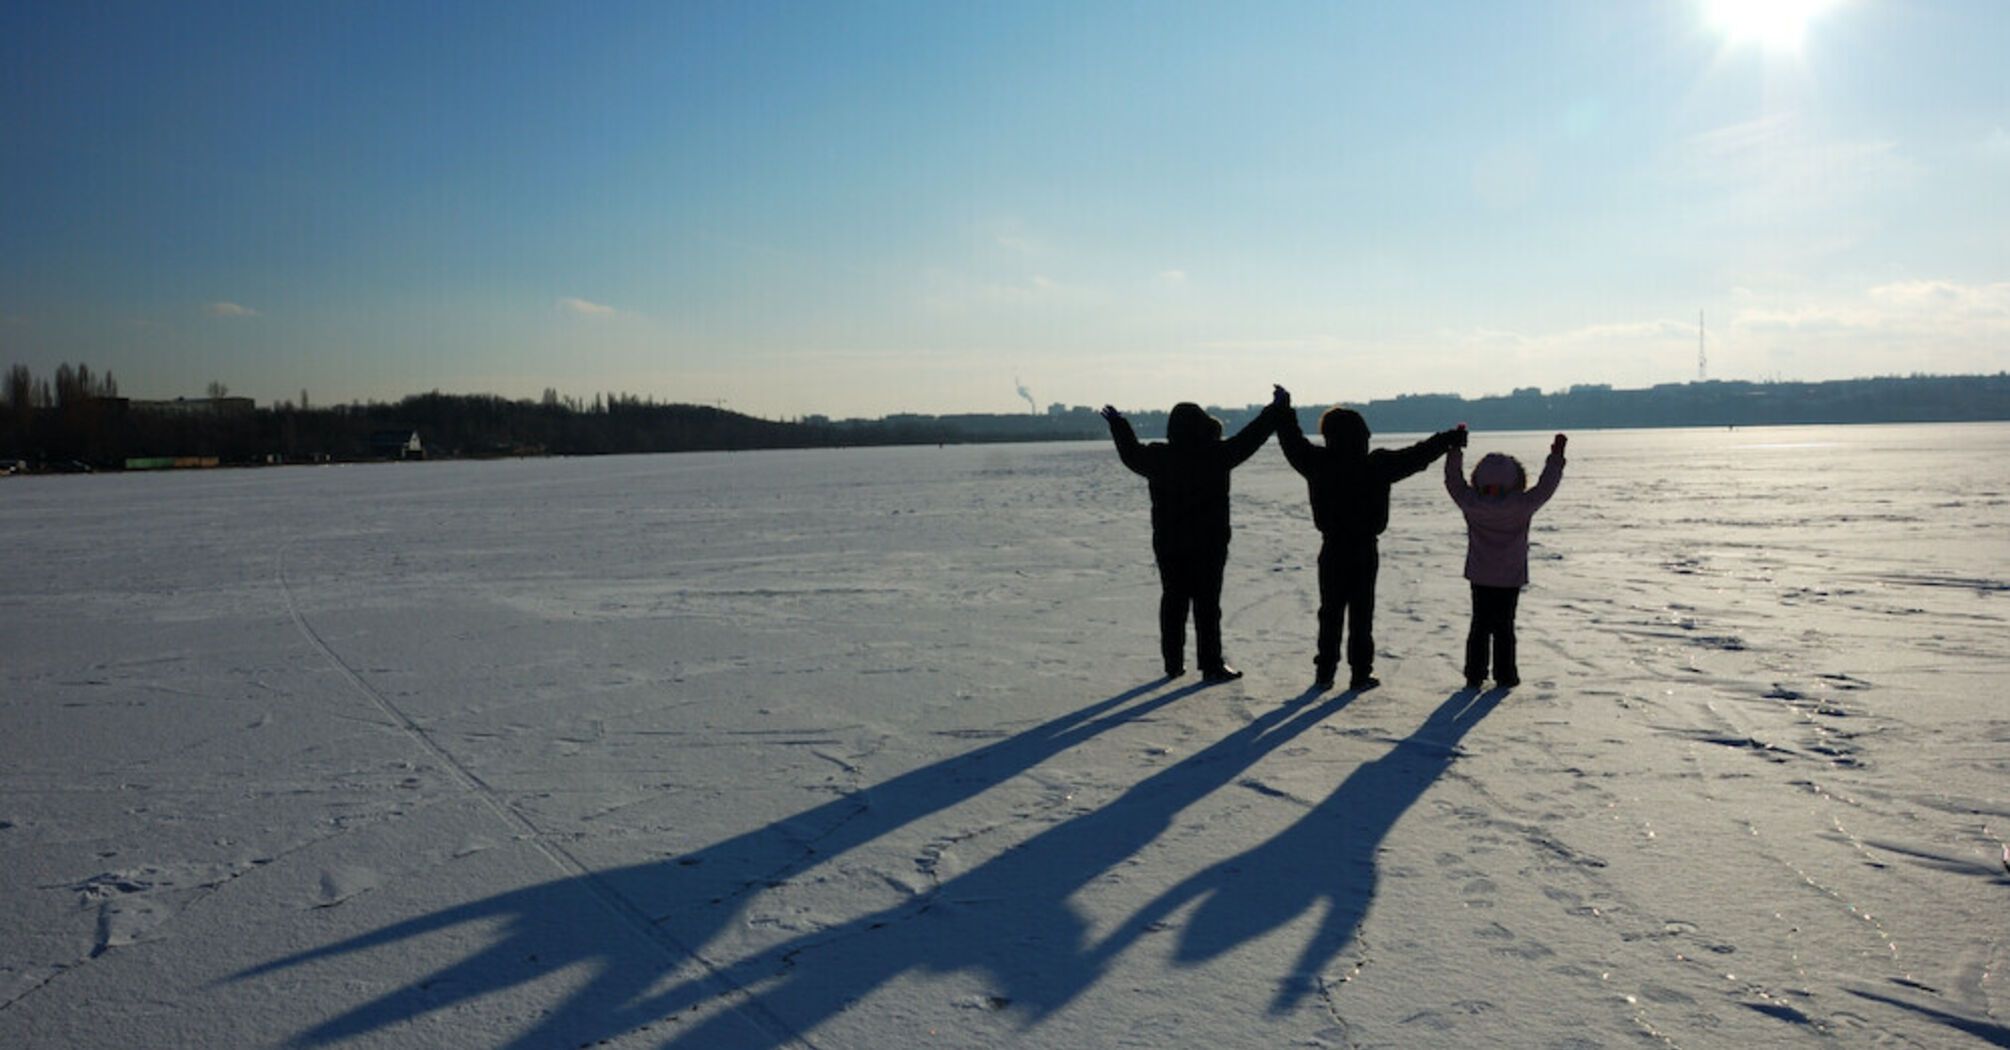 How to walk safely on ice in winter